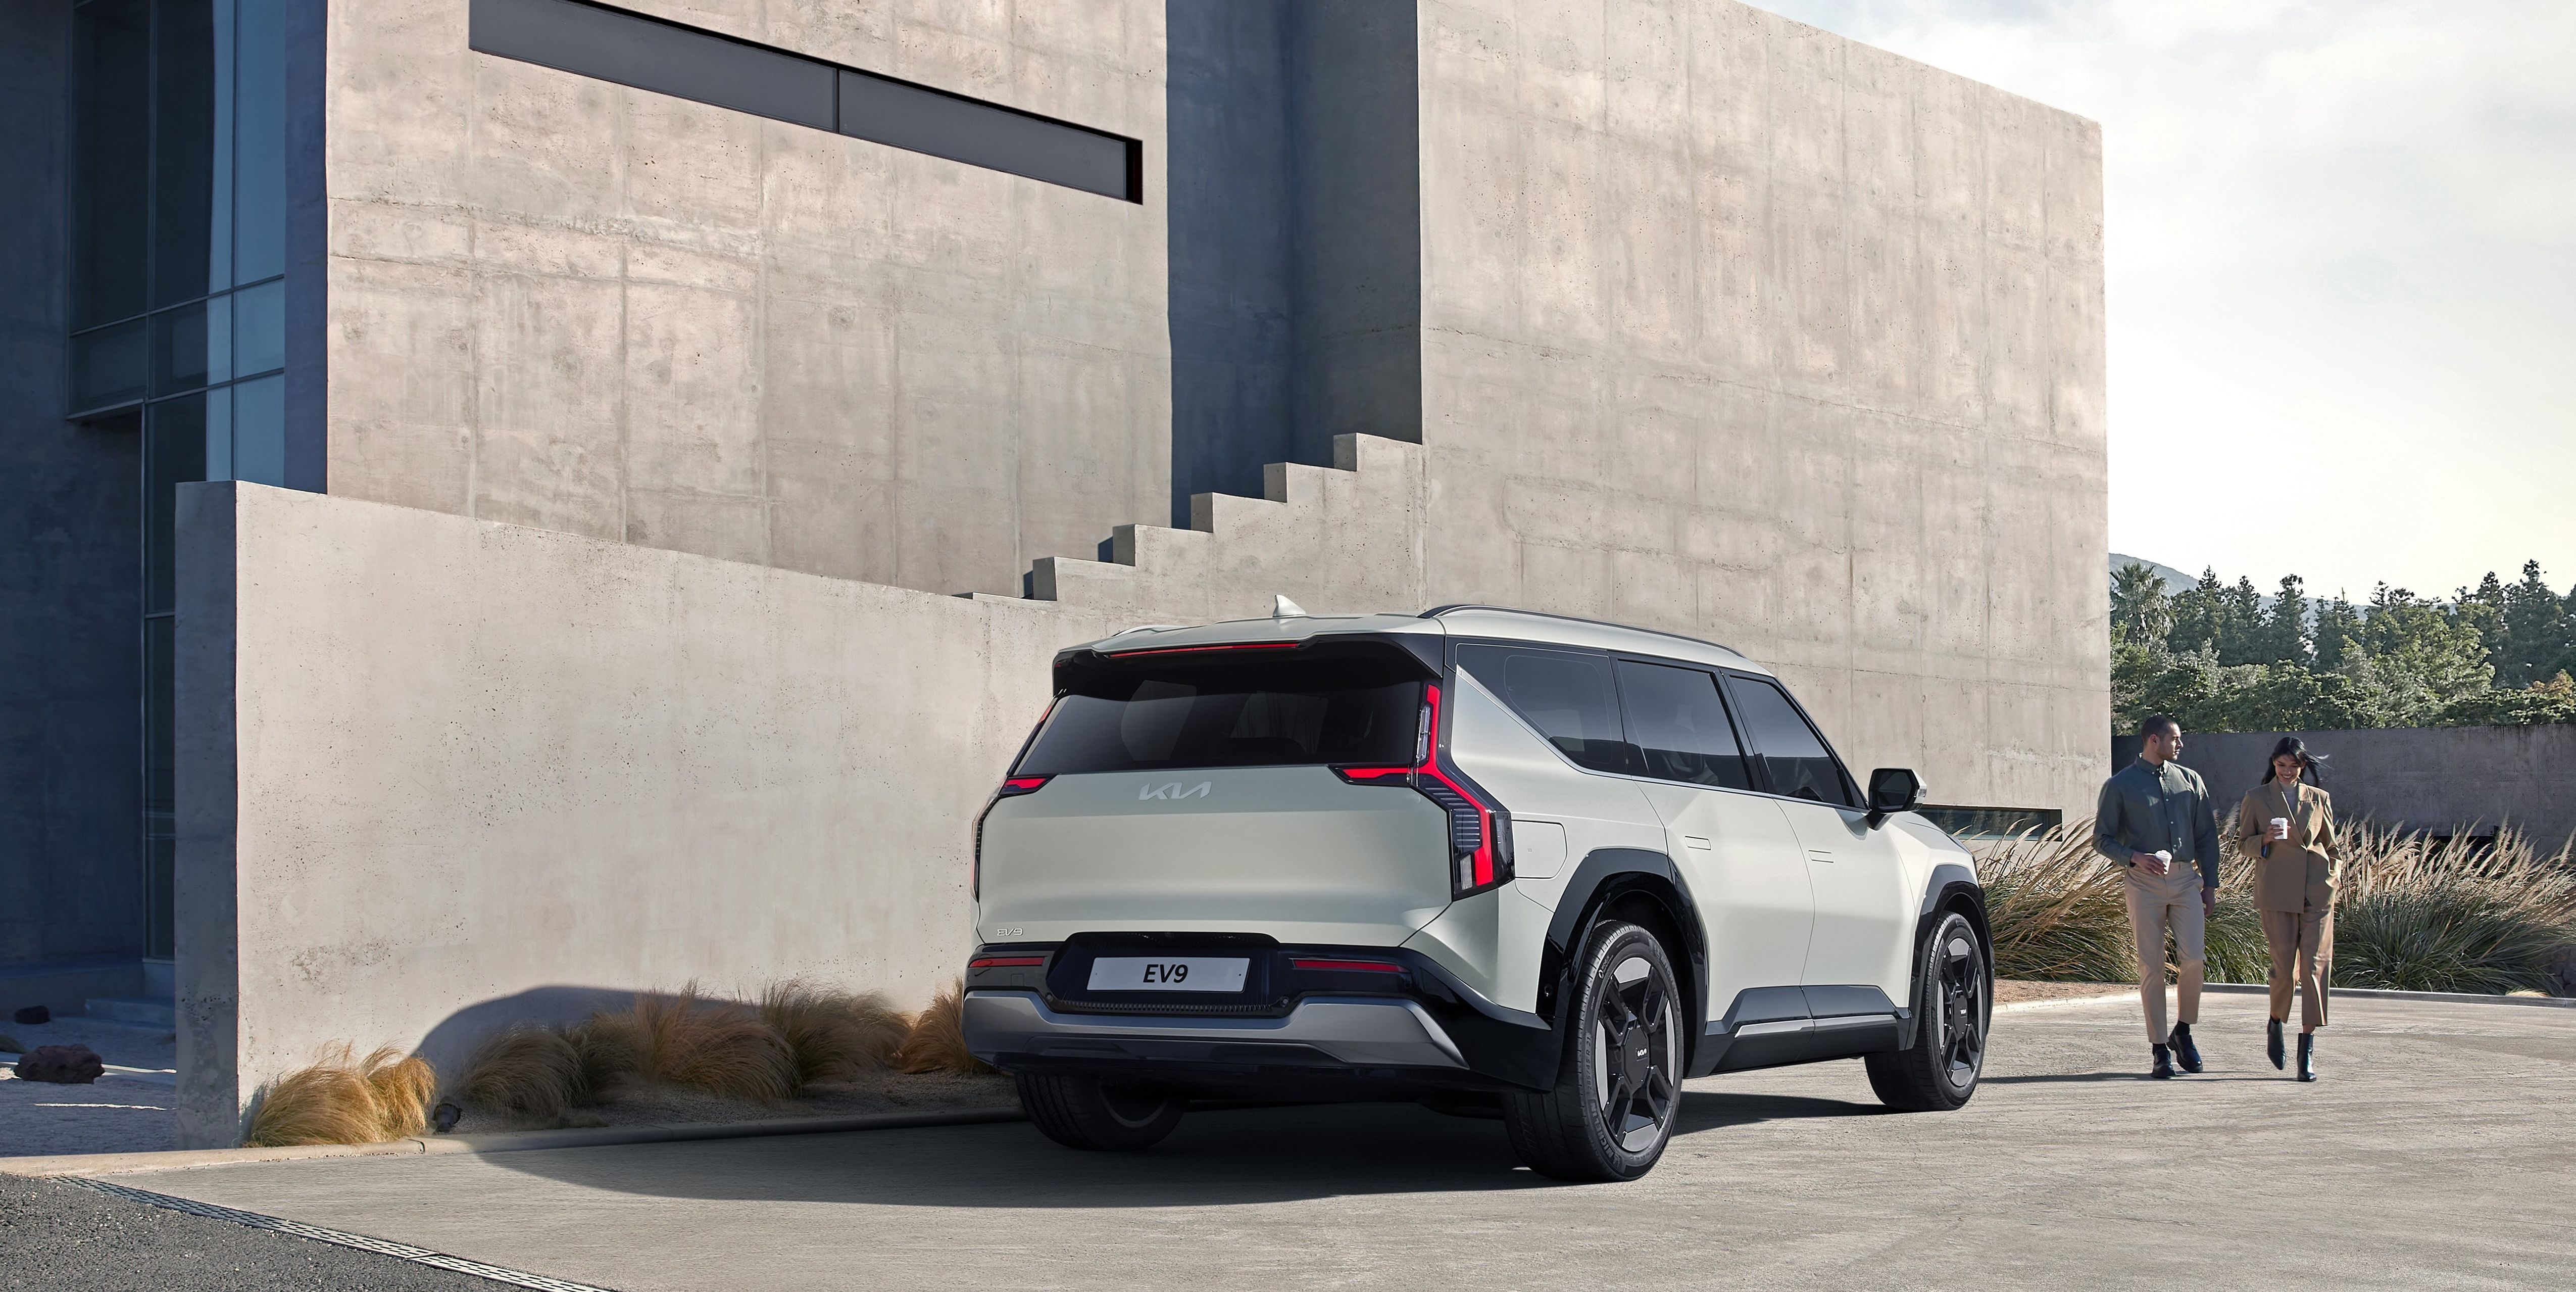 The Kia EV9 Is a Giant Electric SUV With Swivel Seats